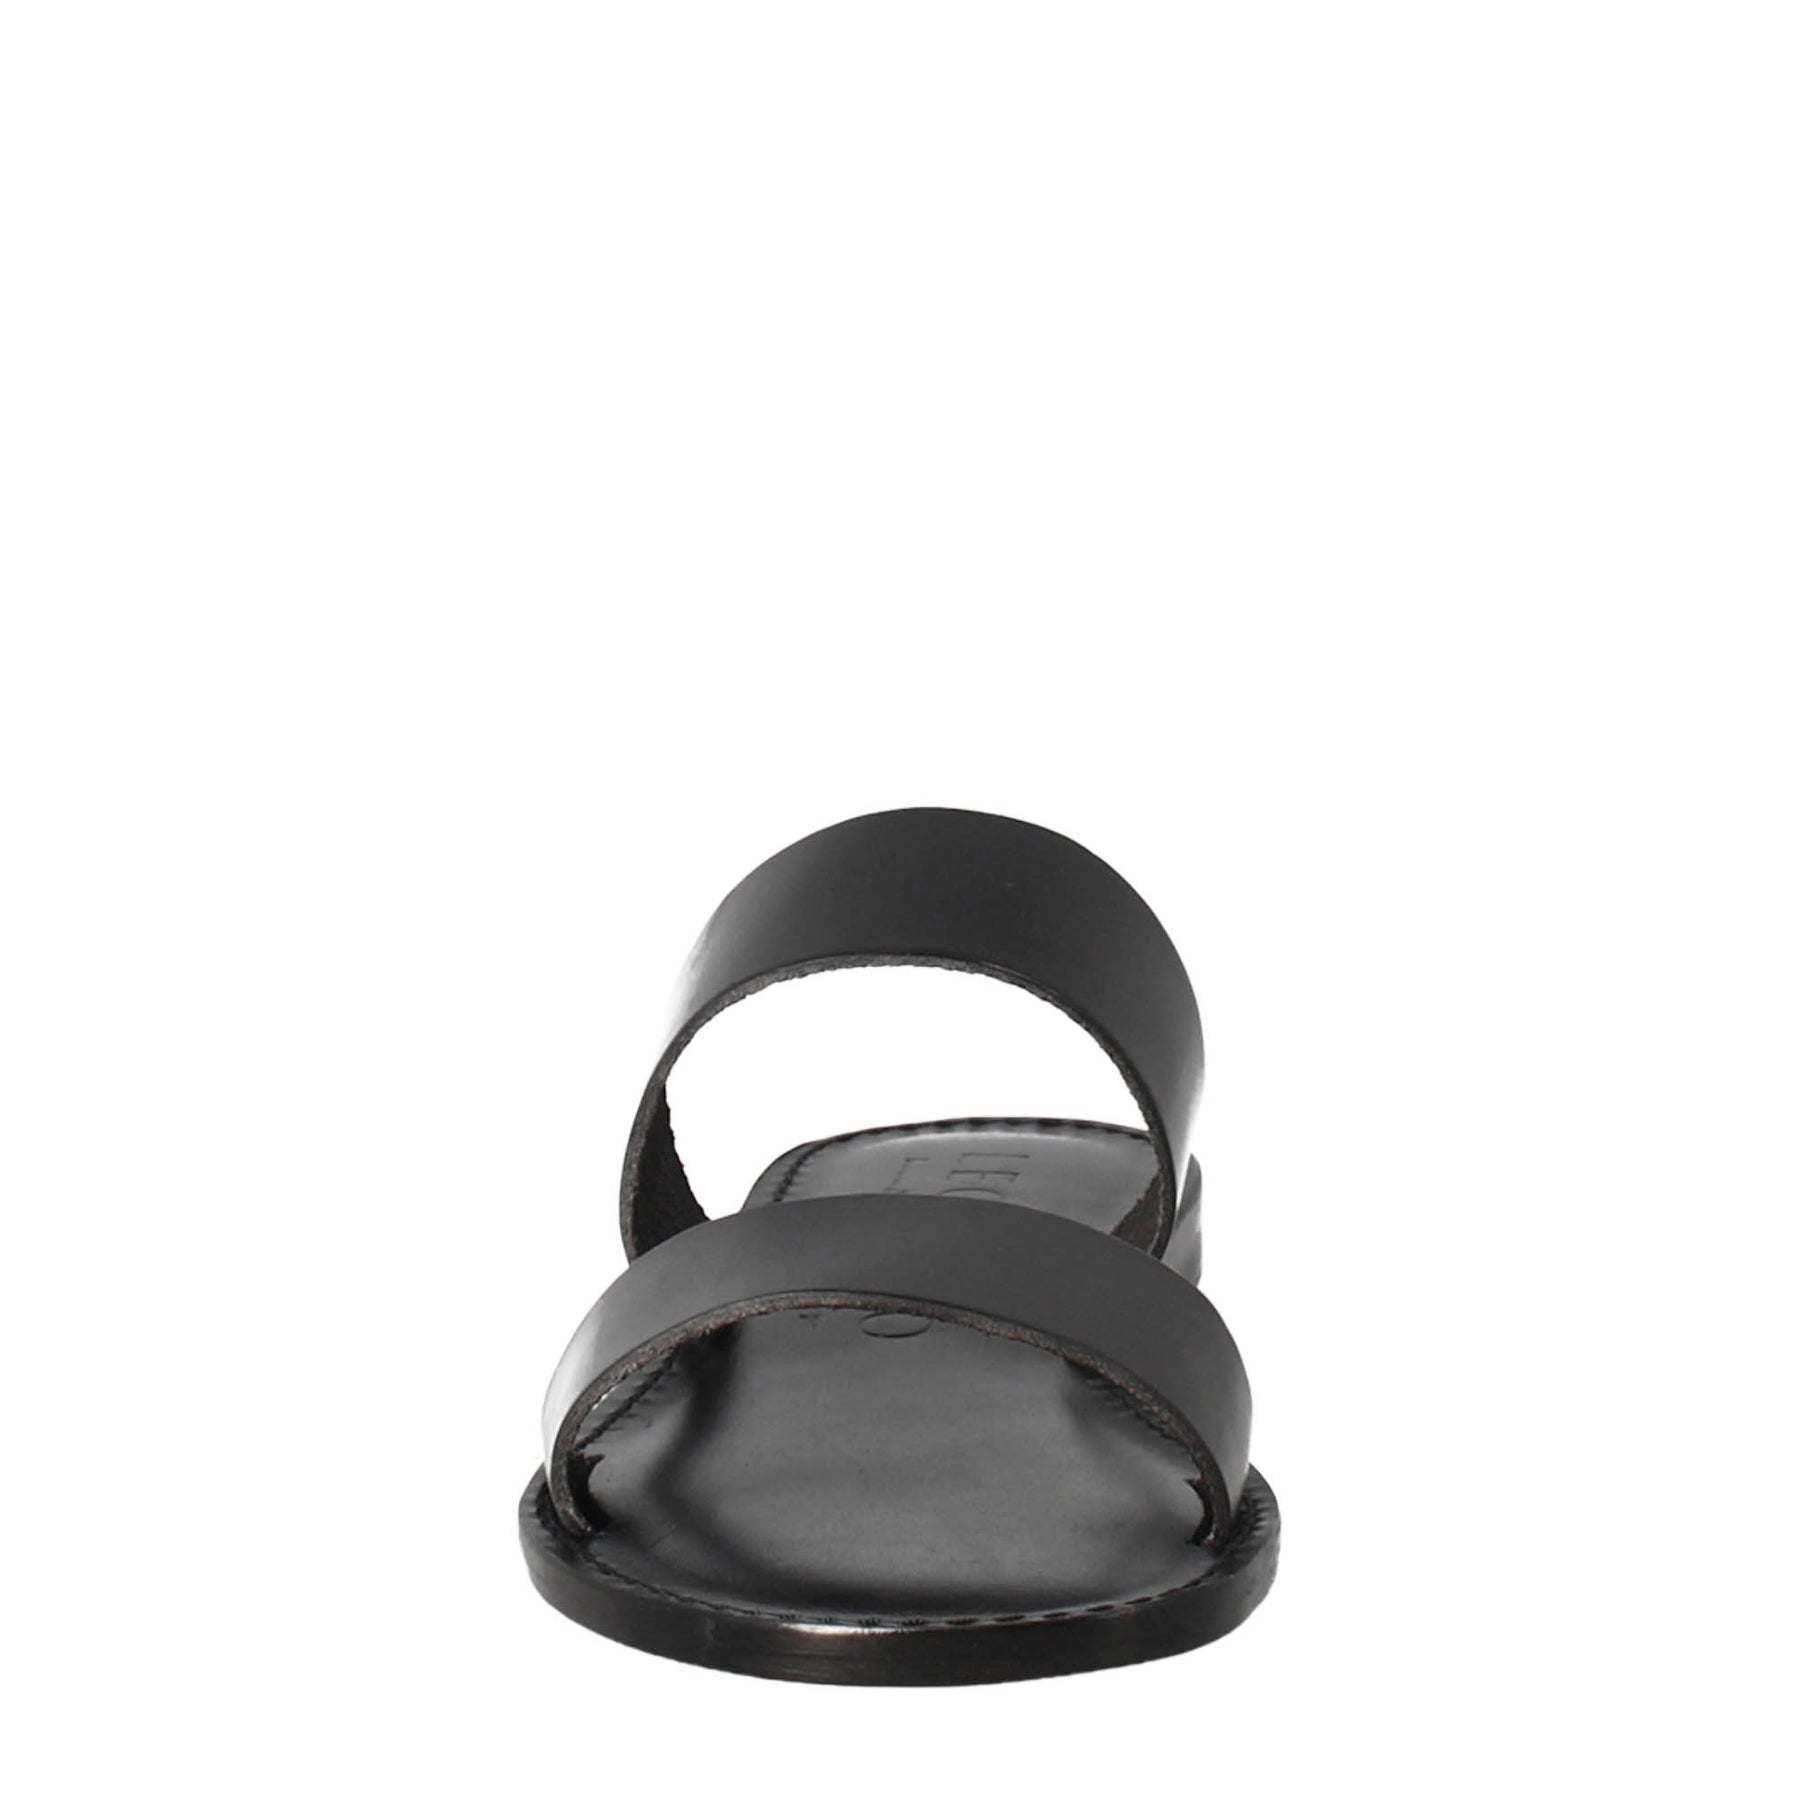 Nirvana women's sandals in ancient Roman style in black leather 